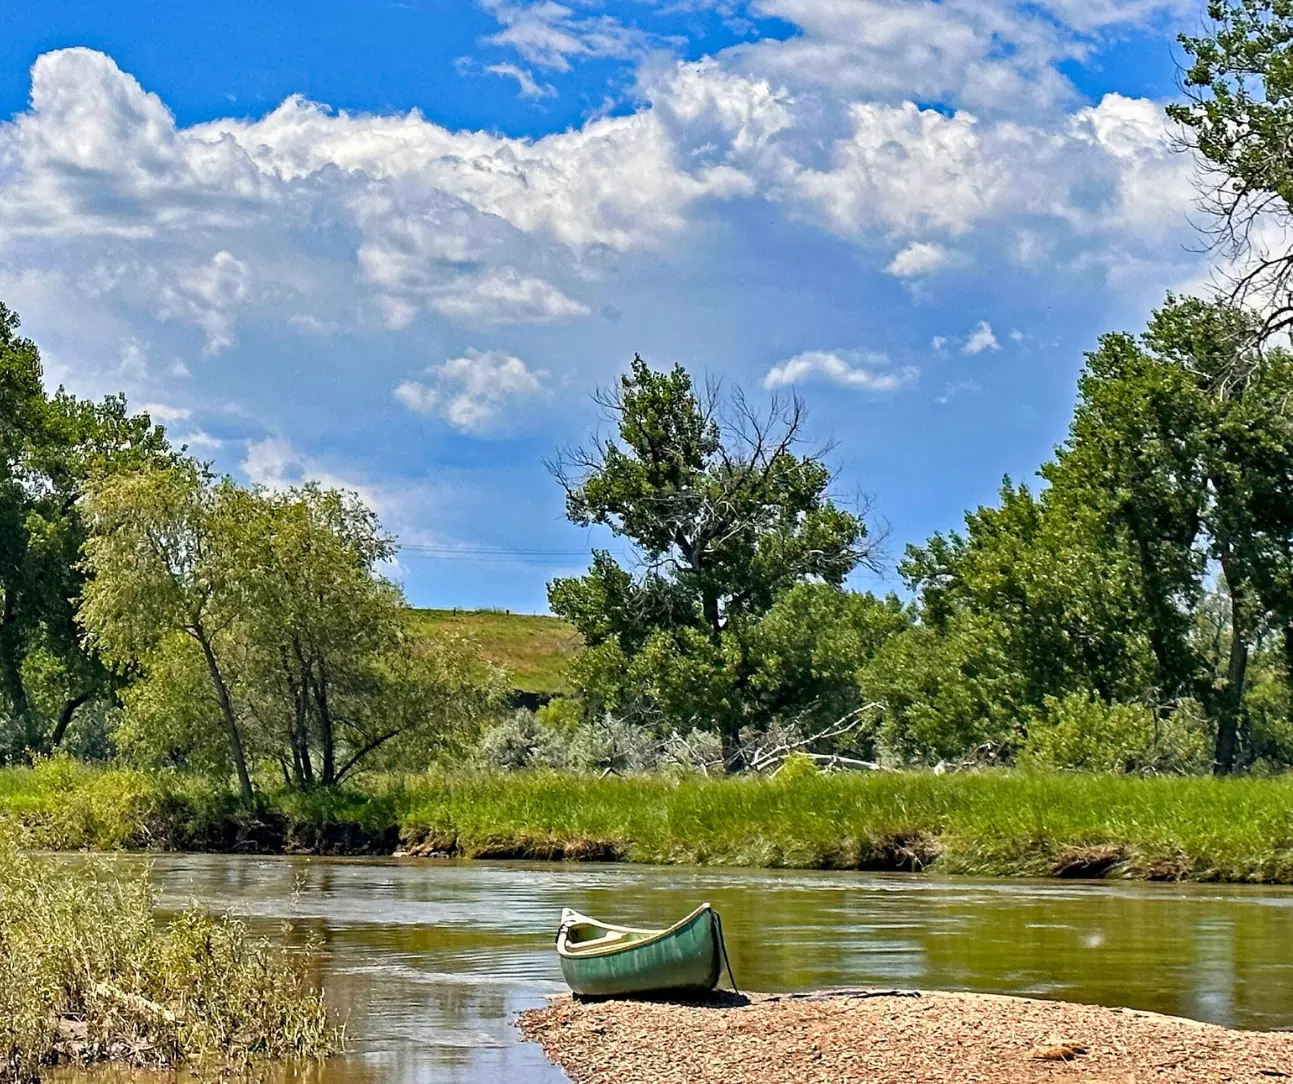 About St. Vrain River